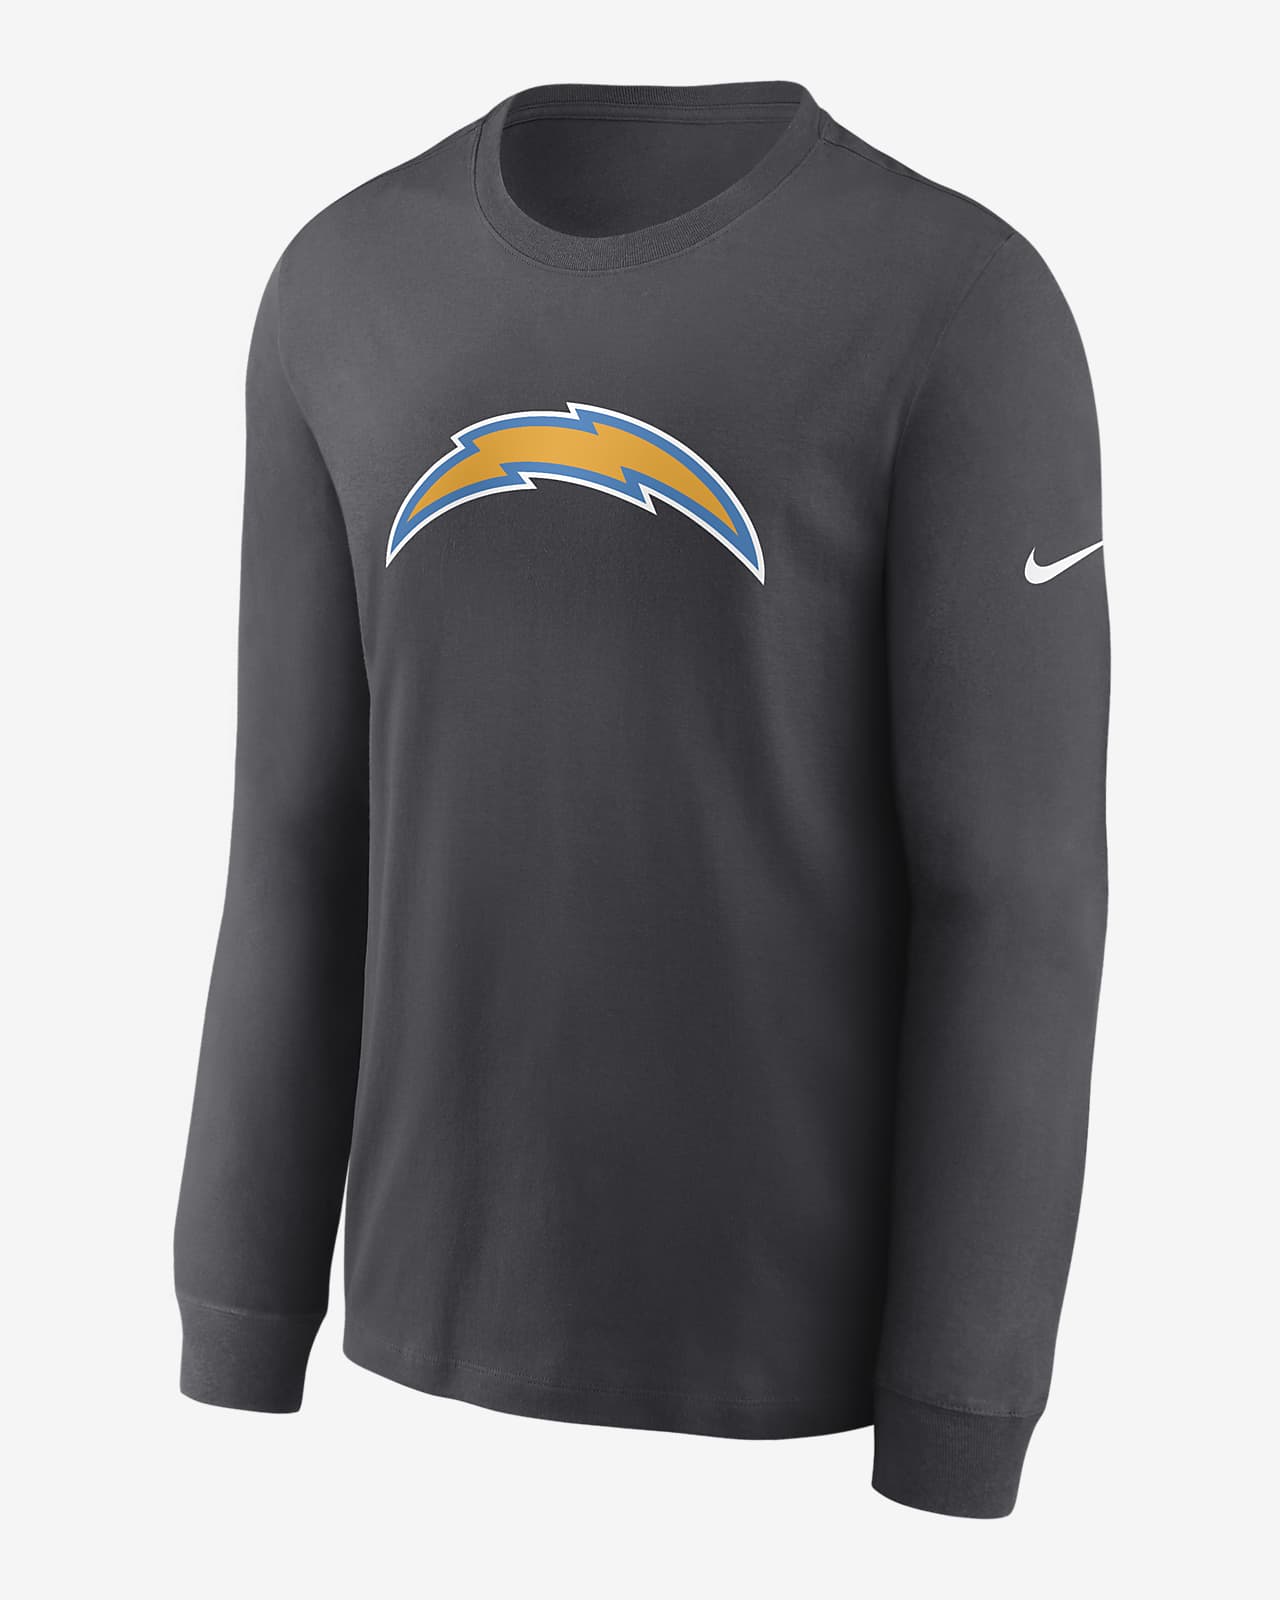 Nike Primary Logo (NFL Los Angeles Chargers) Men’s Long-Sleeve T-Shirt